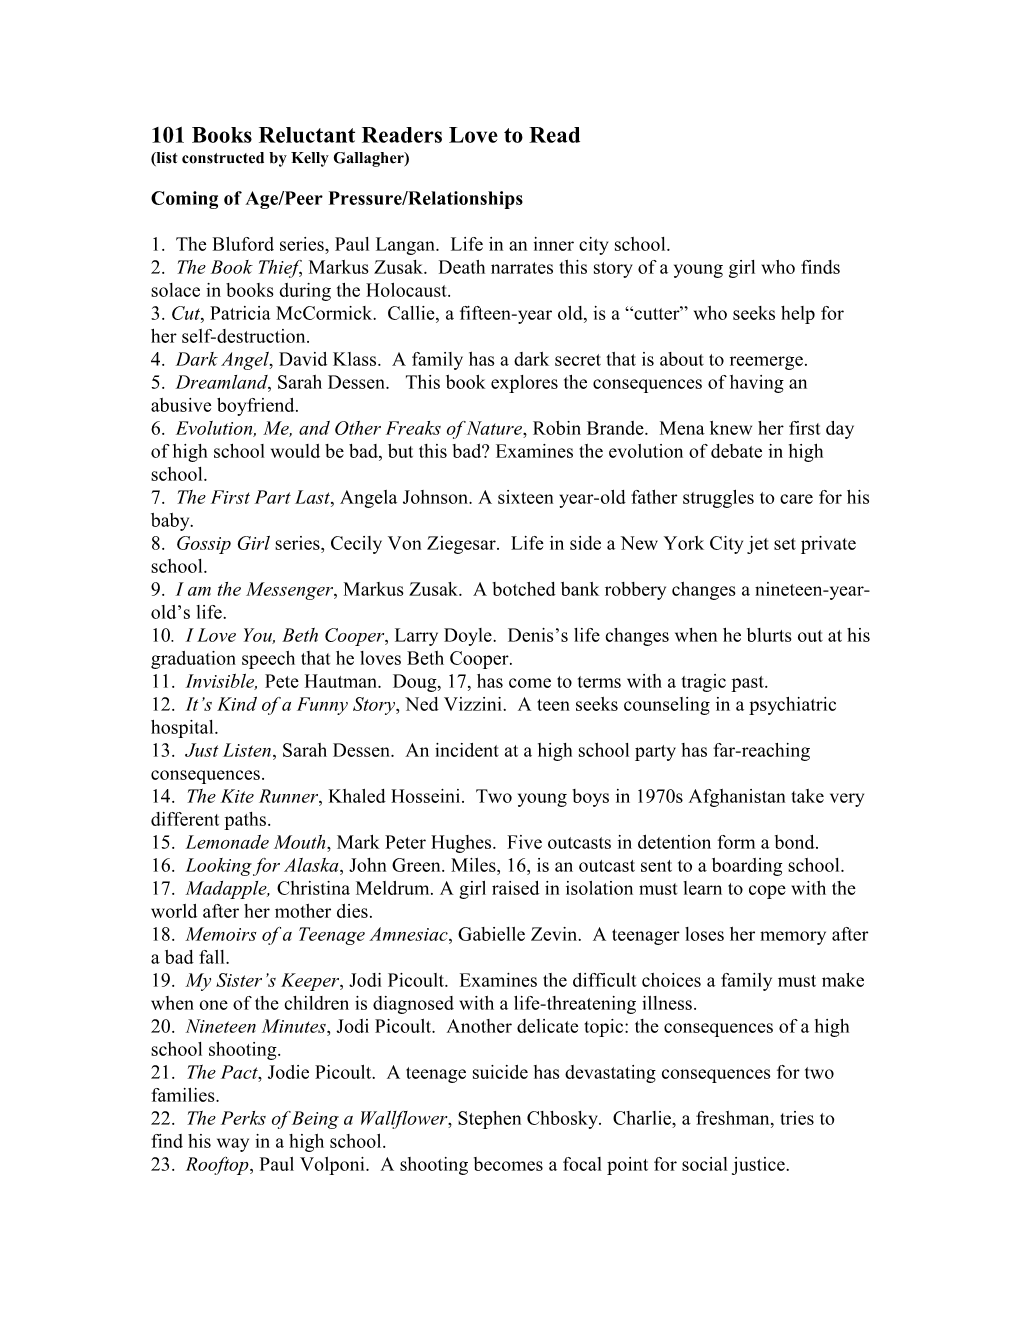 101 Books Reluctant Readers Love to Read (List Constructed by Kelly Gallagher)